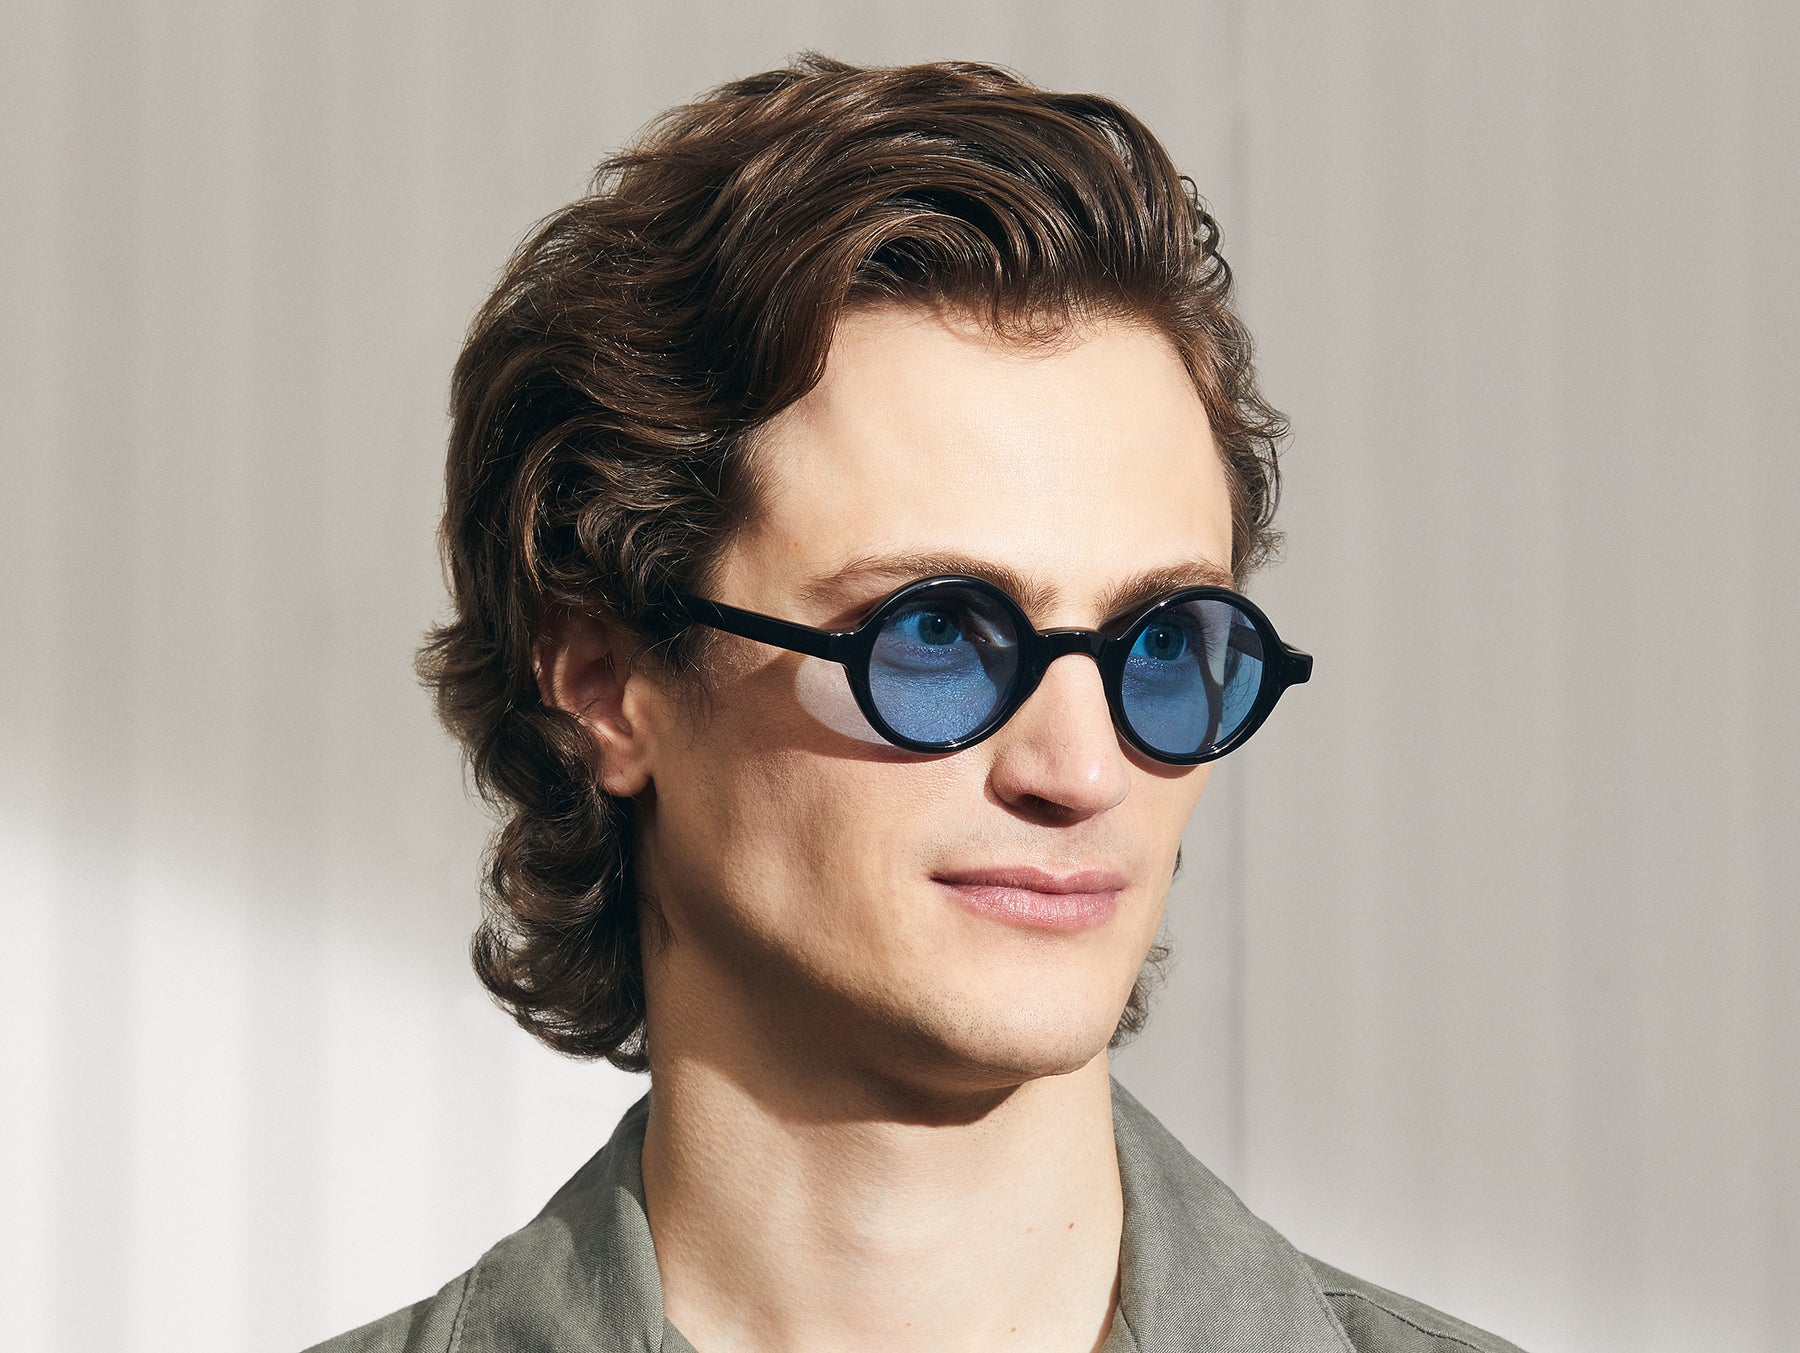 Model is wearing The ZOLMAN in Black in size 42 with Celebrity Blue Tinted Lenses